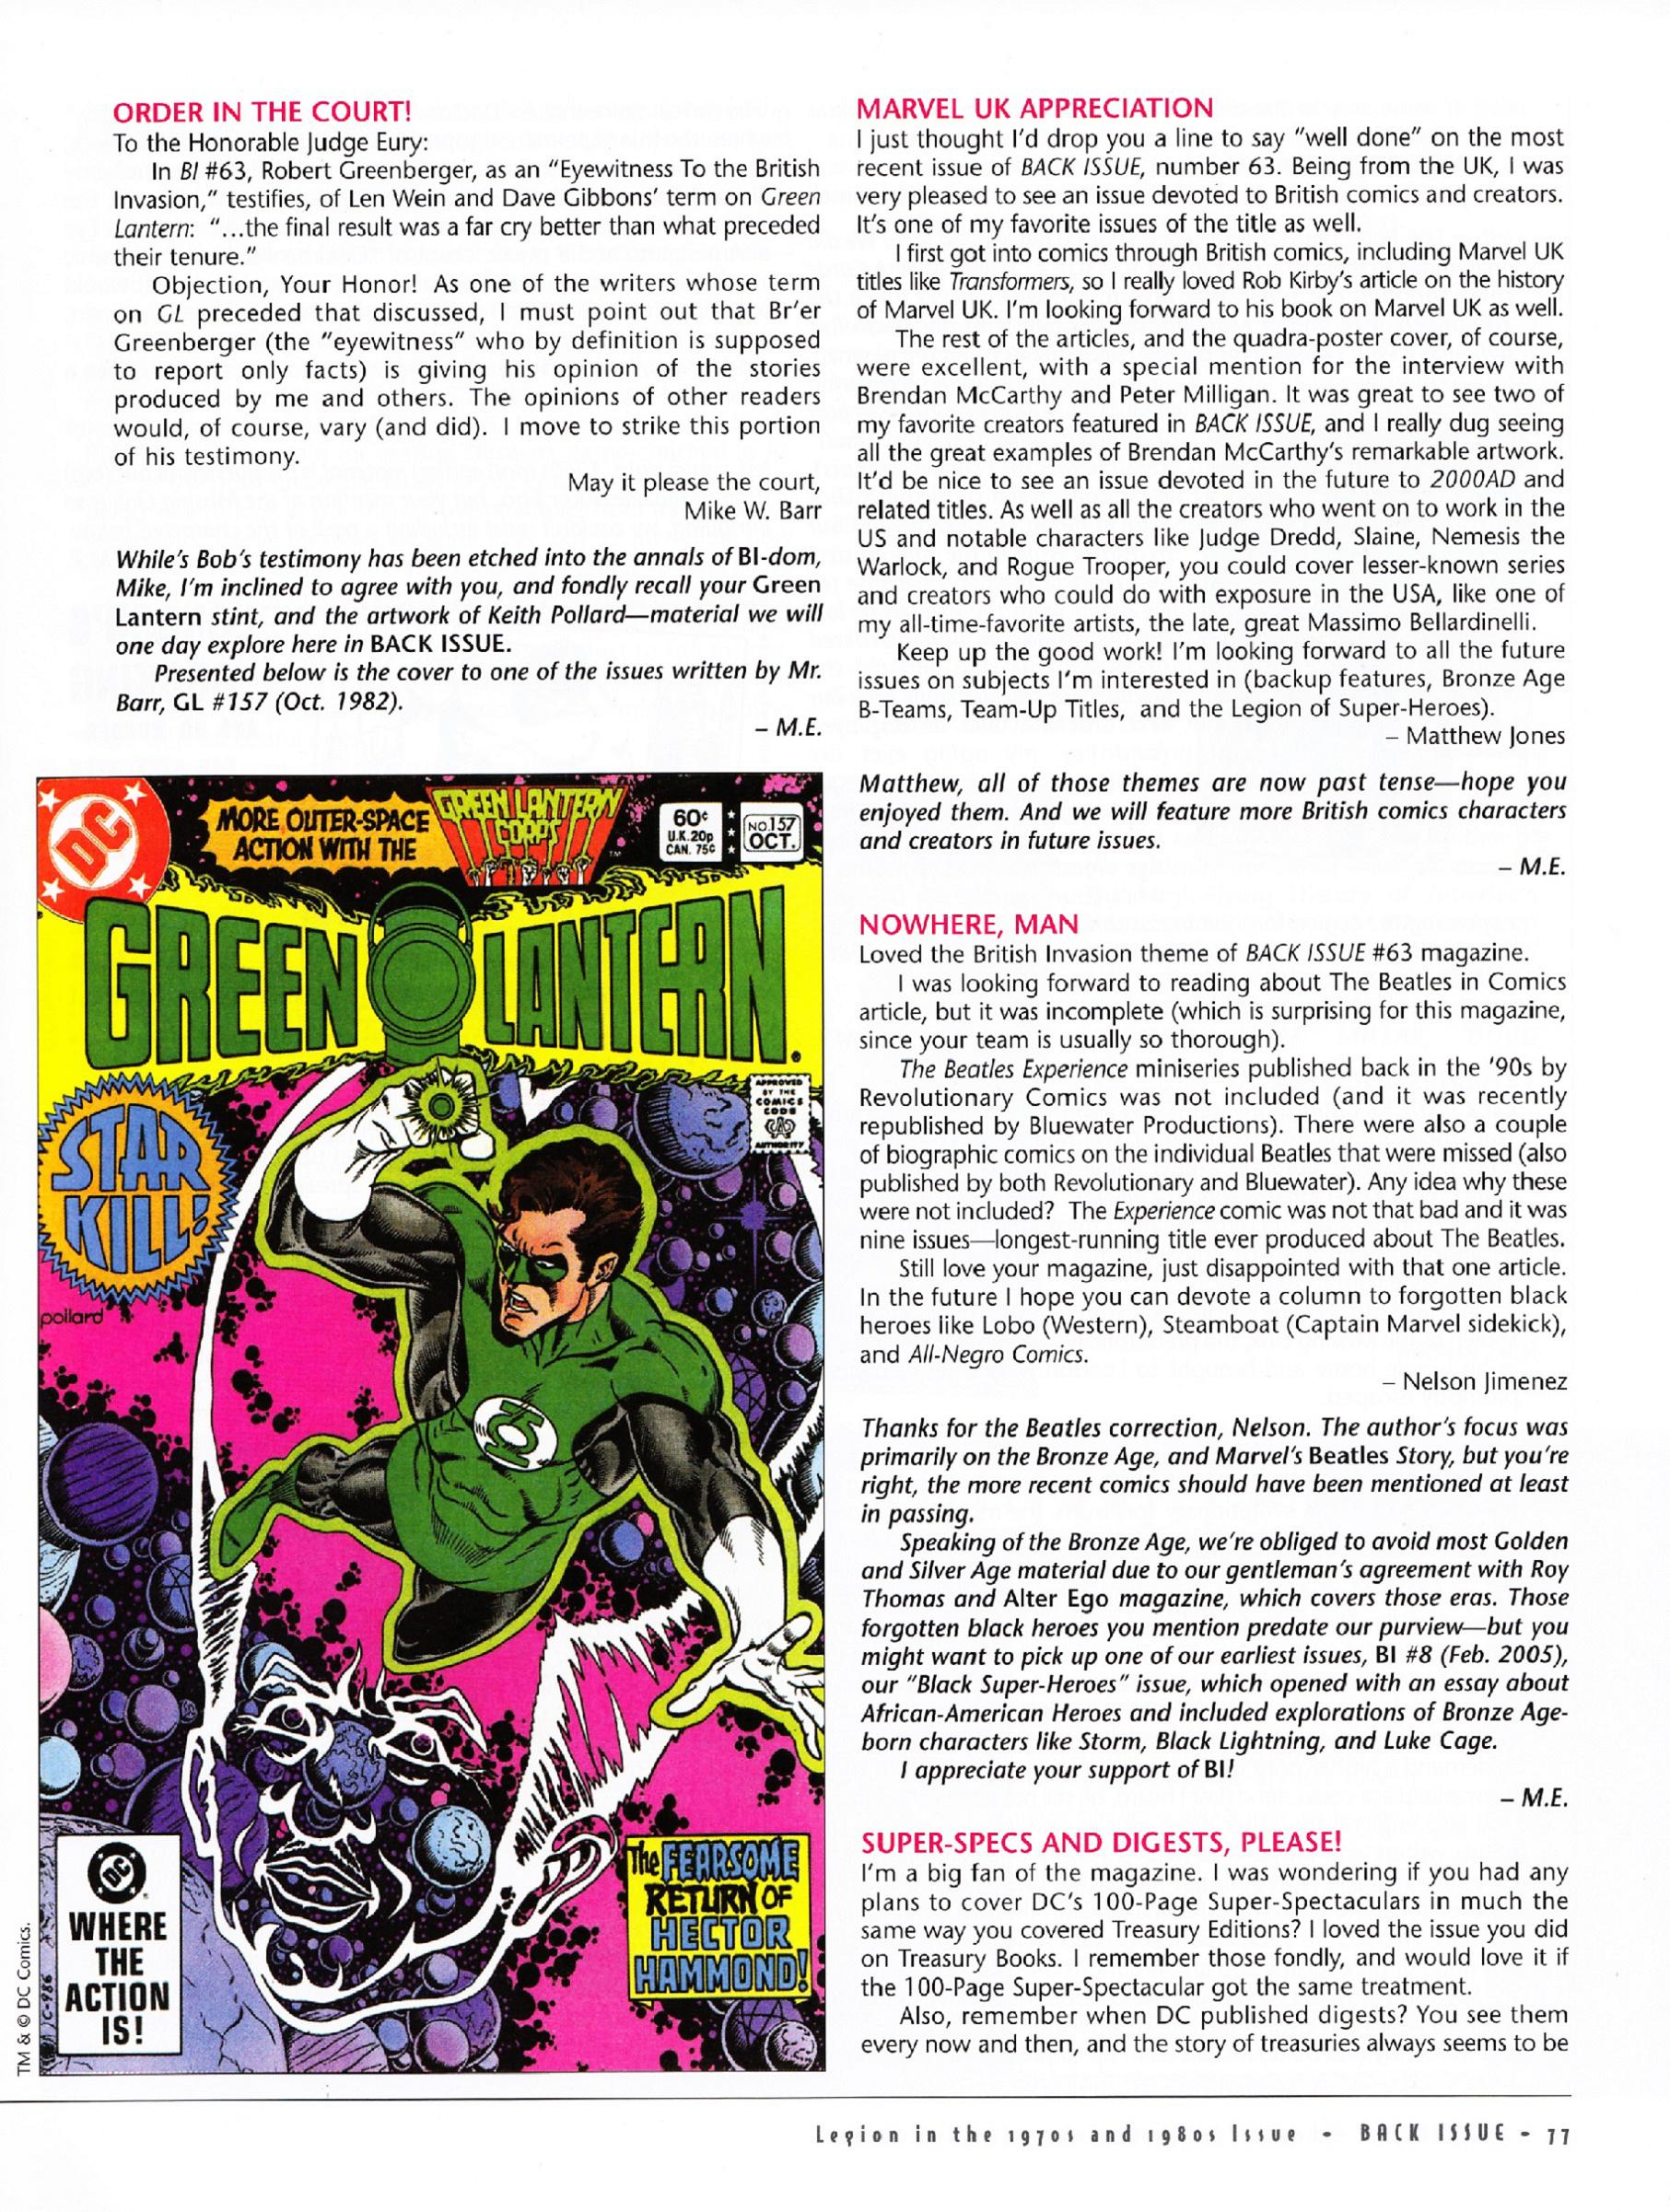 Read online Back Issue comic -  Issue #68 - 79